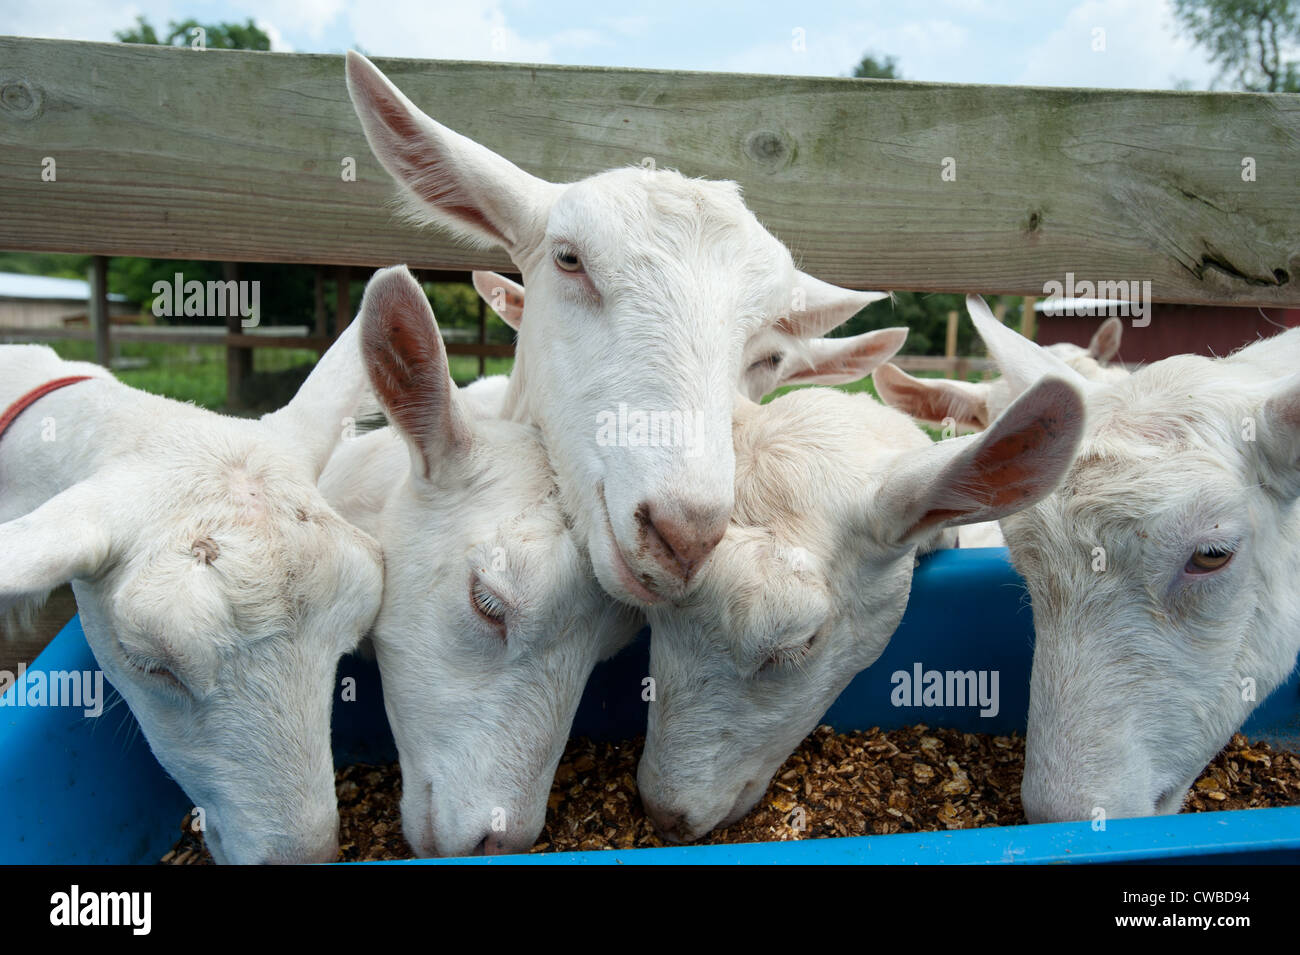 Dairy goat farm breeder and cheese producers Stock Photo